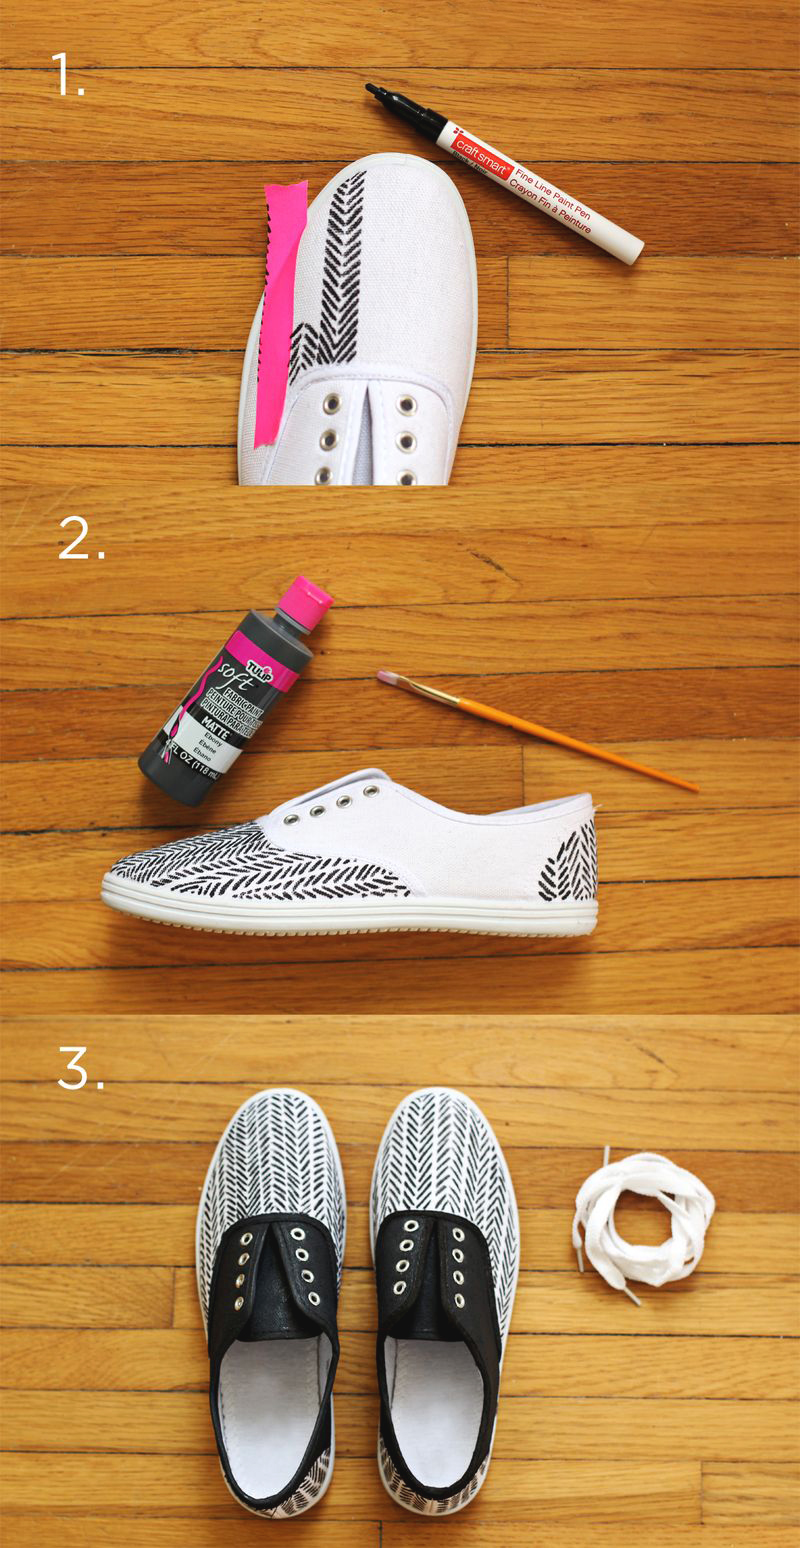 Diy black and white printed shoes